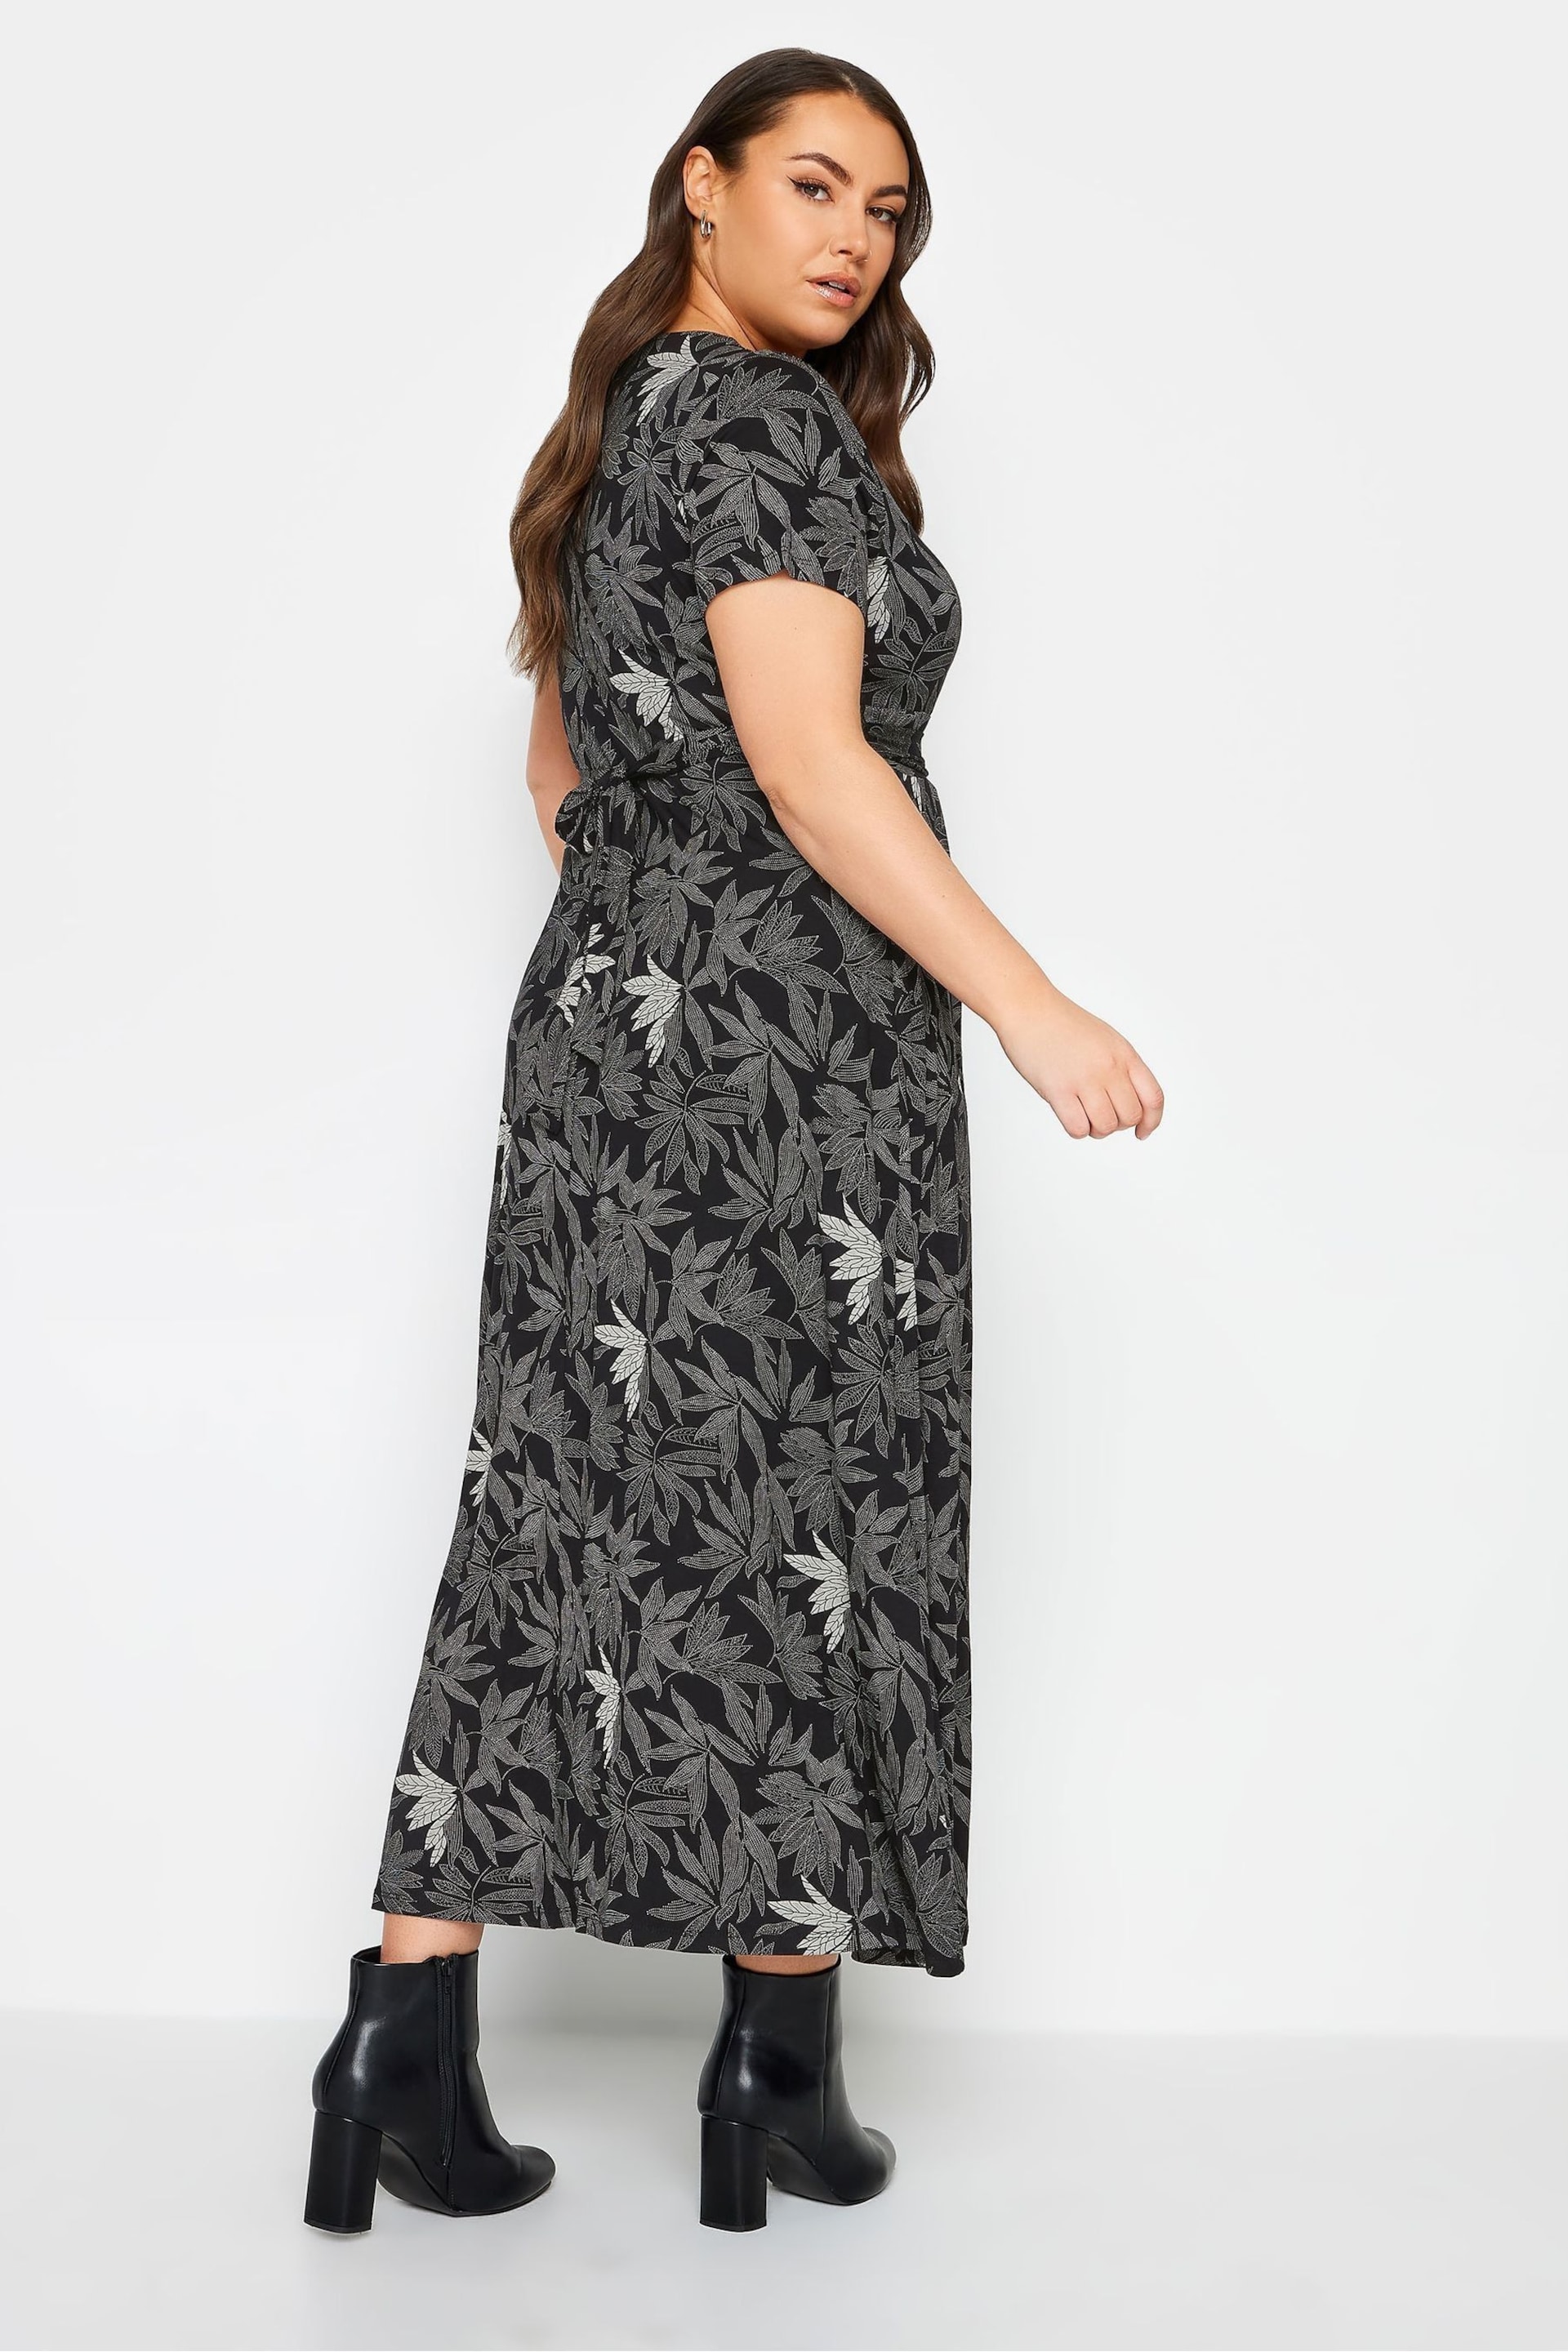 Yours Curve Black Grey Maxi Wrap Dress - Image 3 of 4